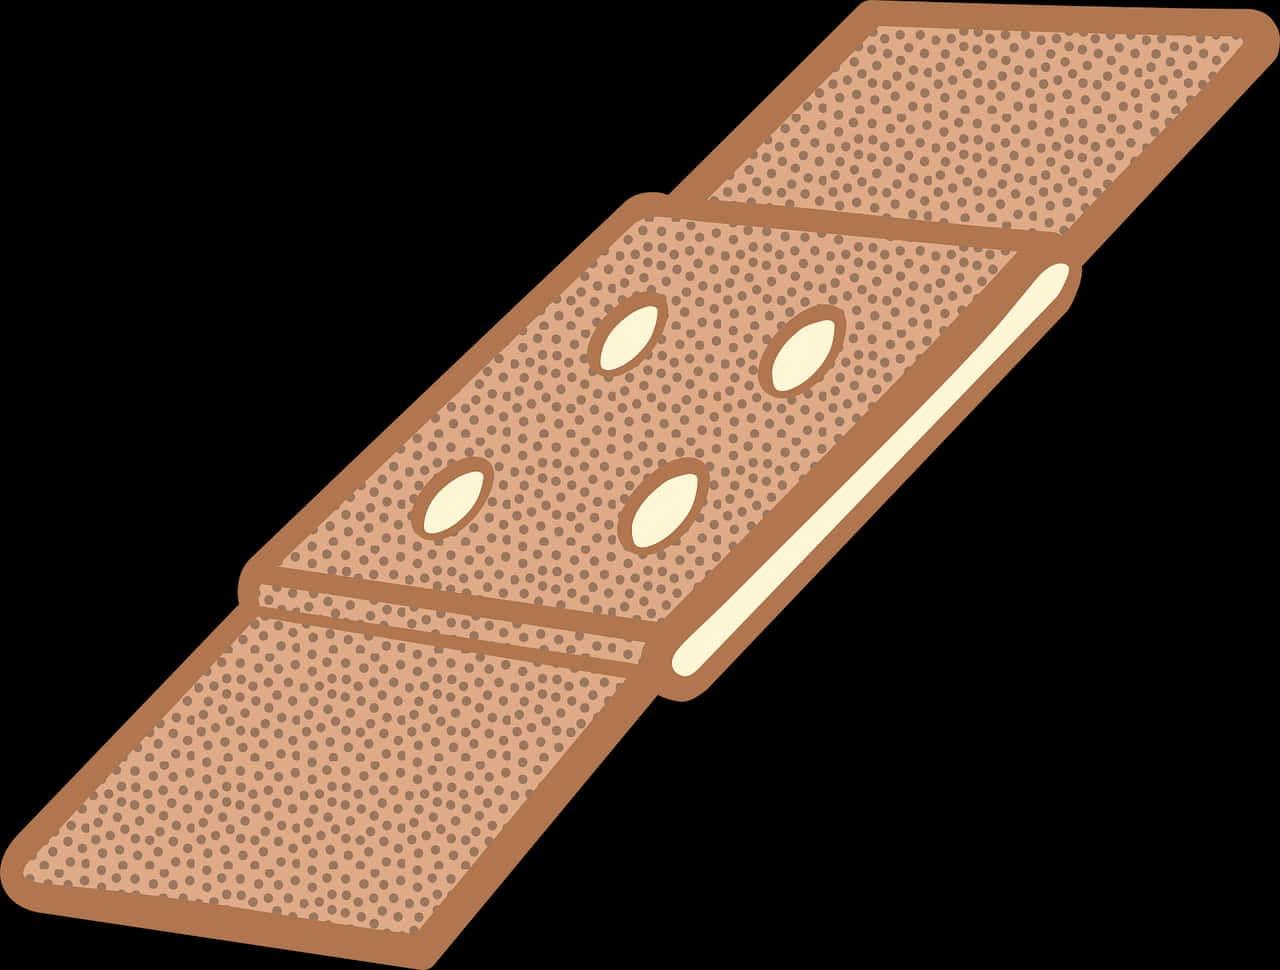 A Rectangular Object With Dots